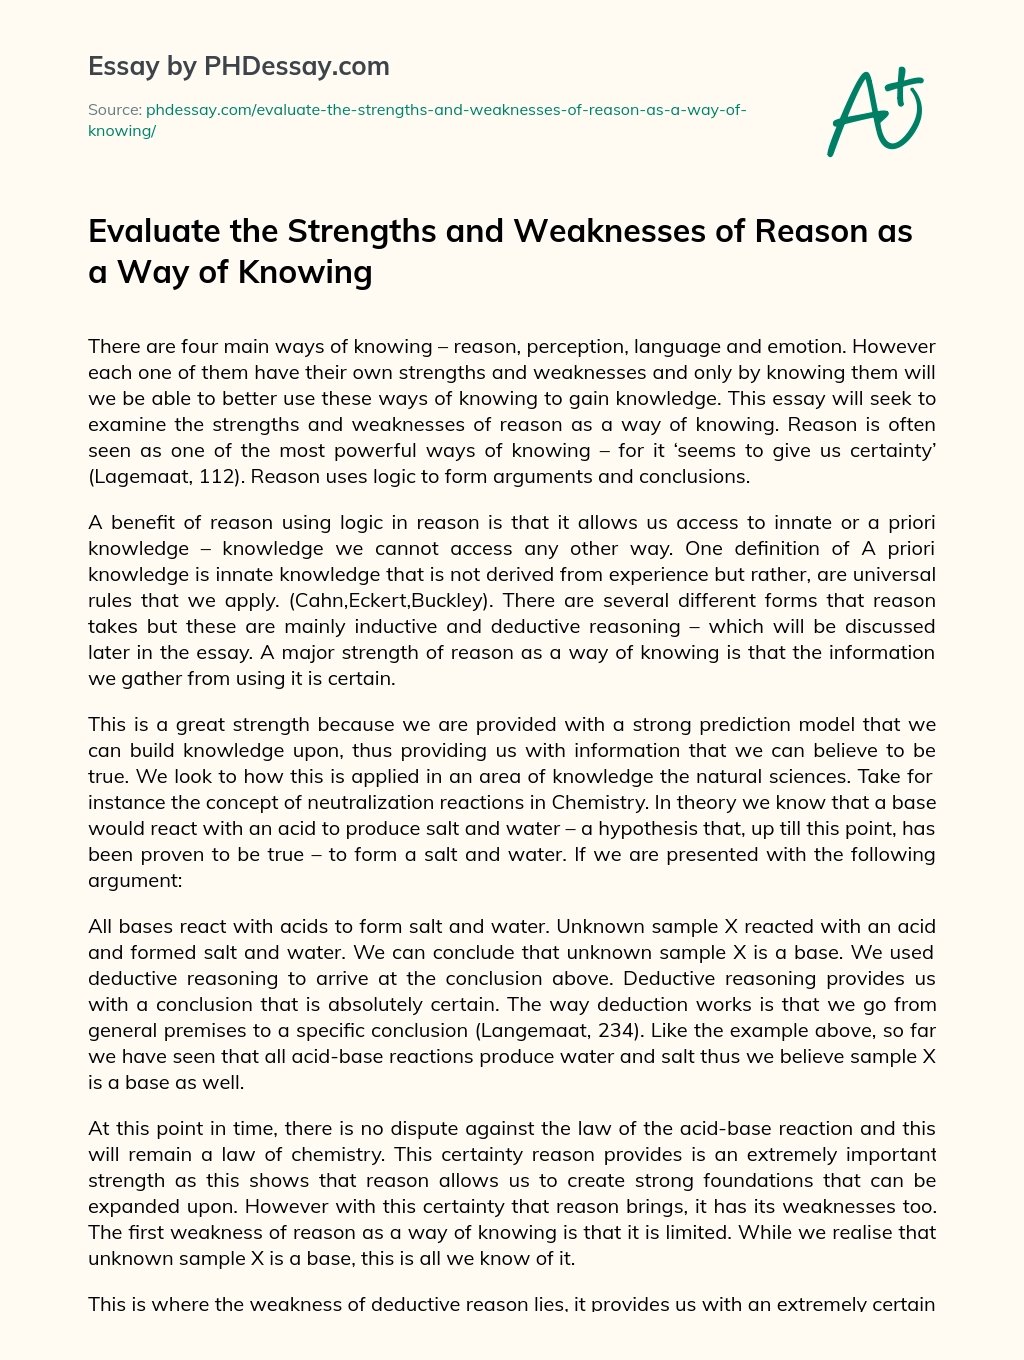 Evaluate the Strengths and Weaknesses of Reason as a Way of Knowing essay